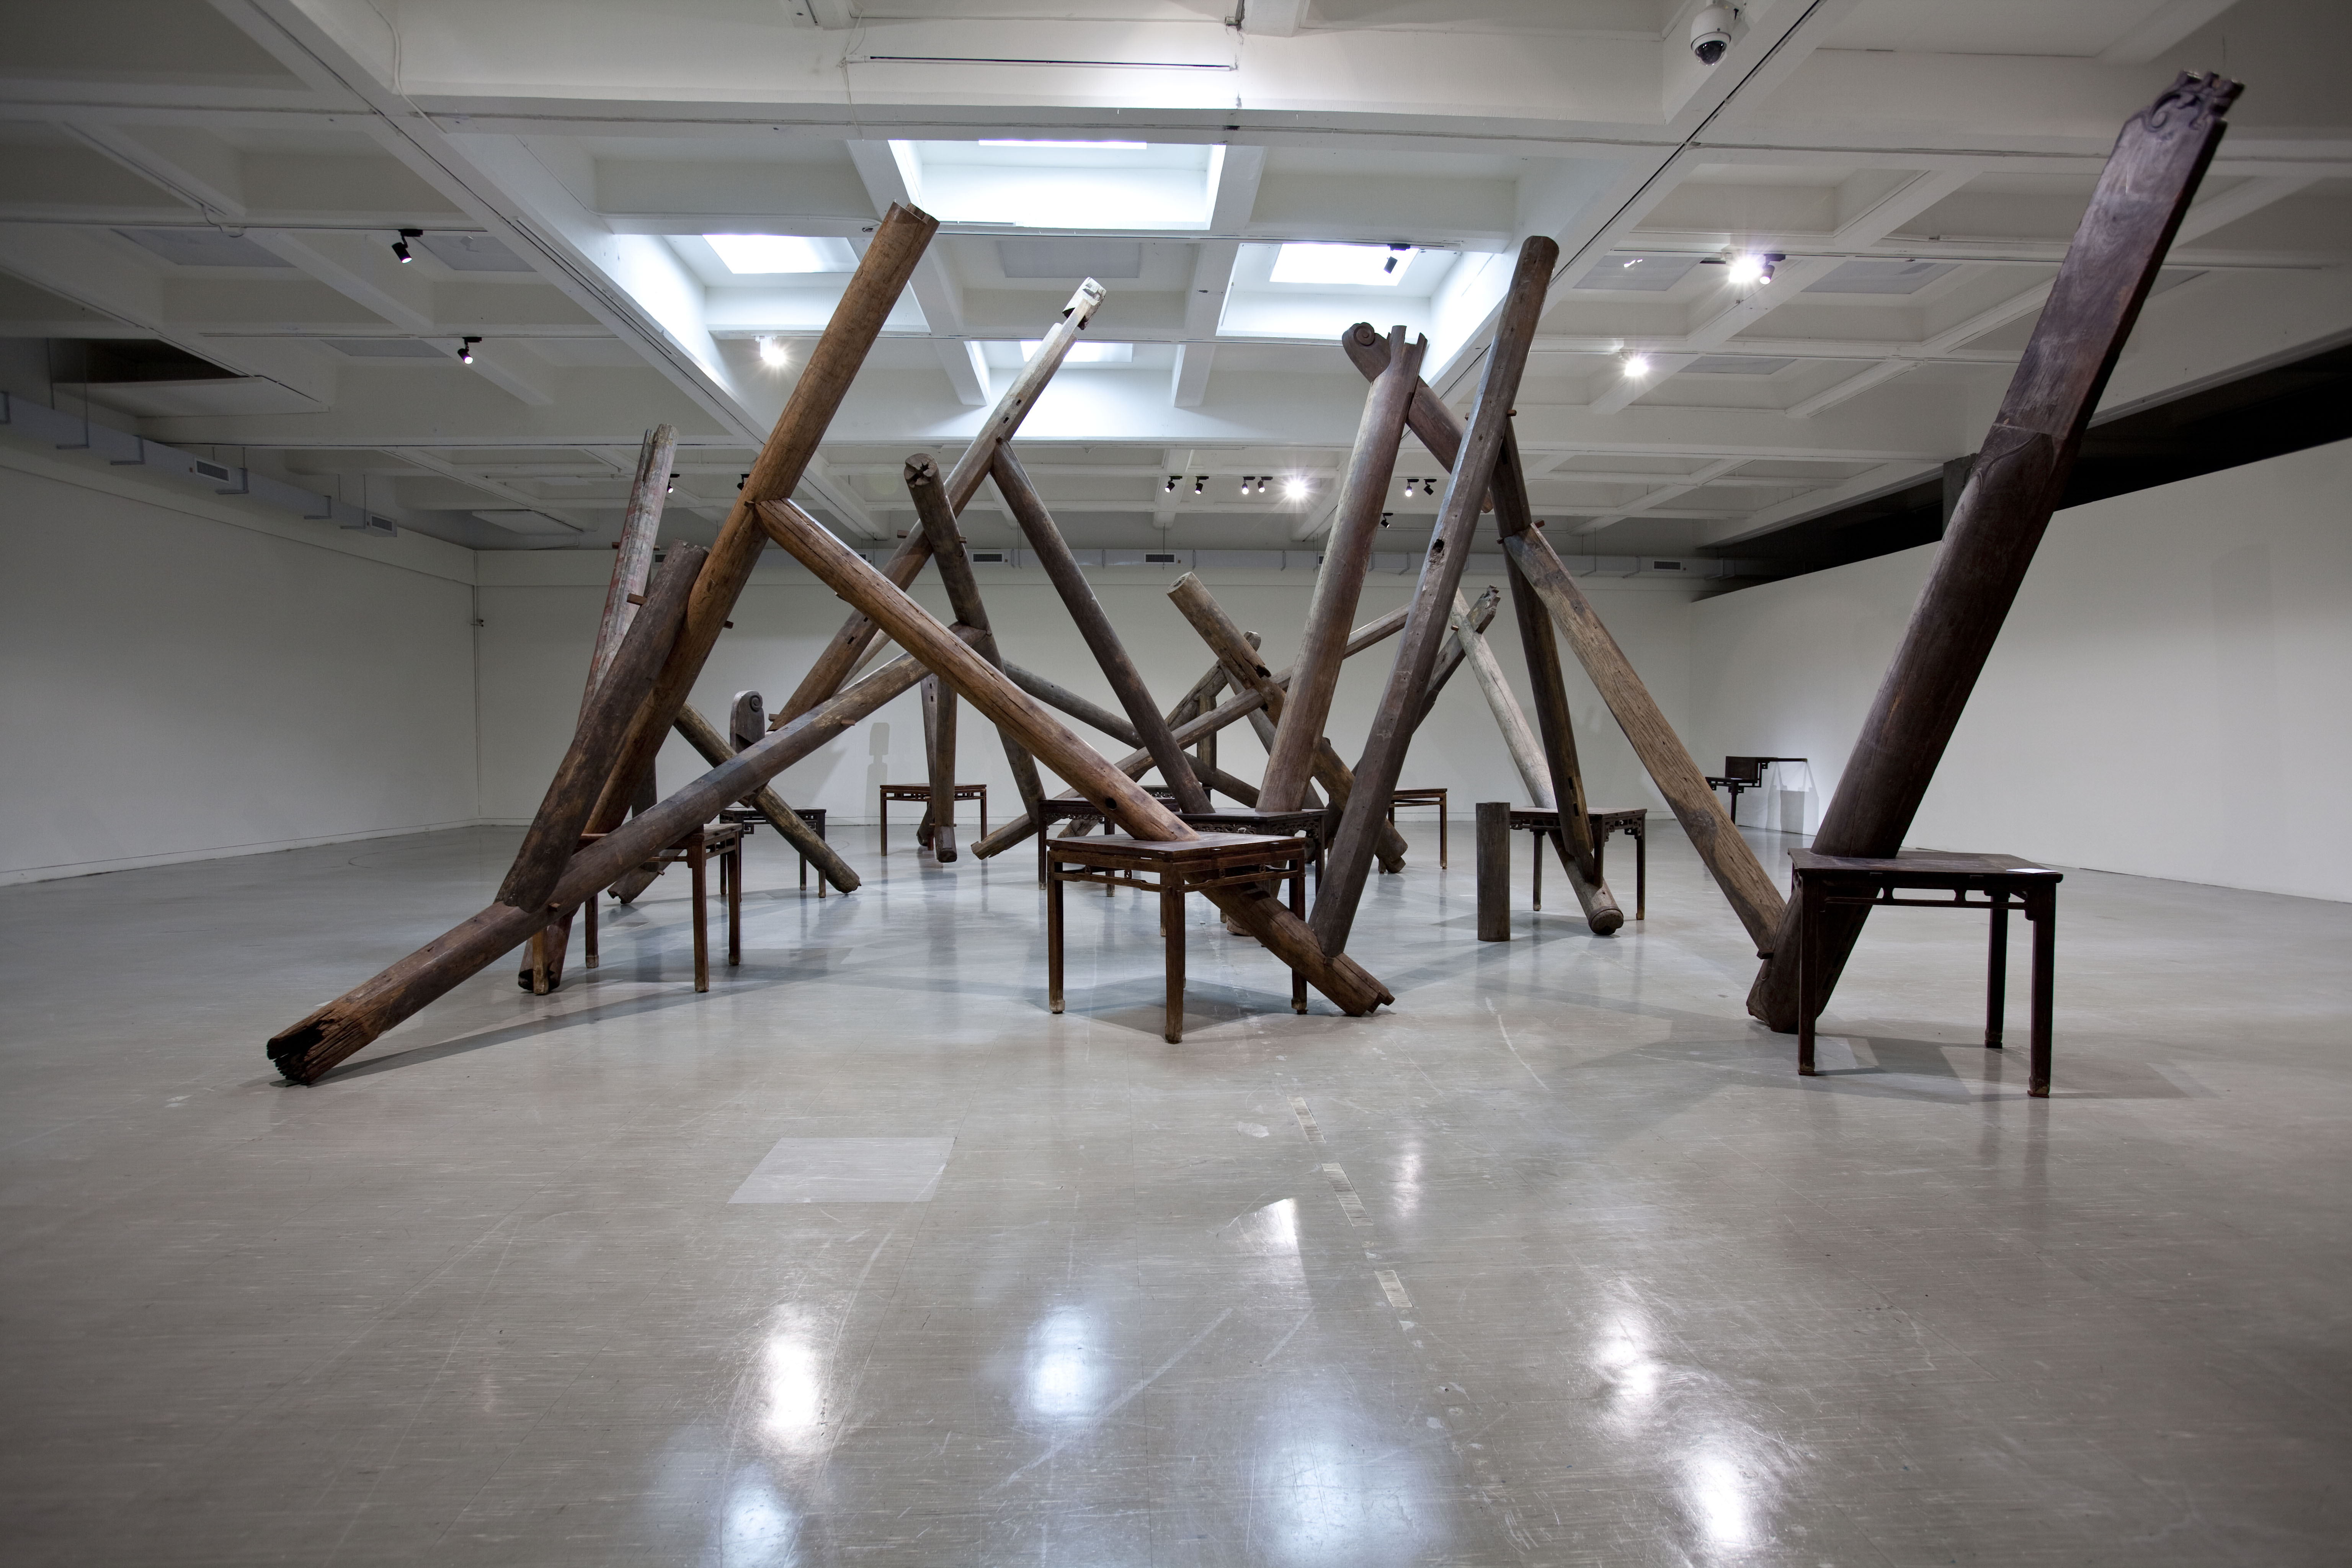 Tables, parts of beams and pillars made of Tieli wood from dismantled temples of Qing Dynasty (1644 - 1911)  | Through   850 x 1380 x 550 cm     2007-2008 的圖說